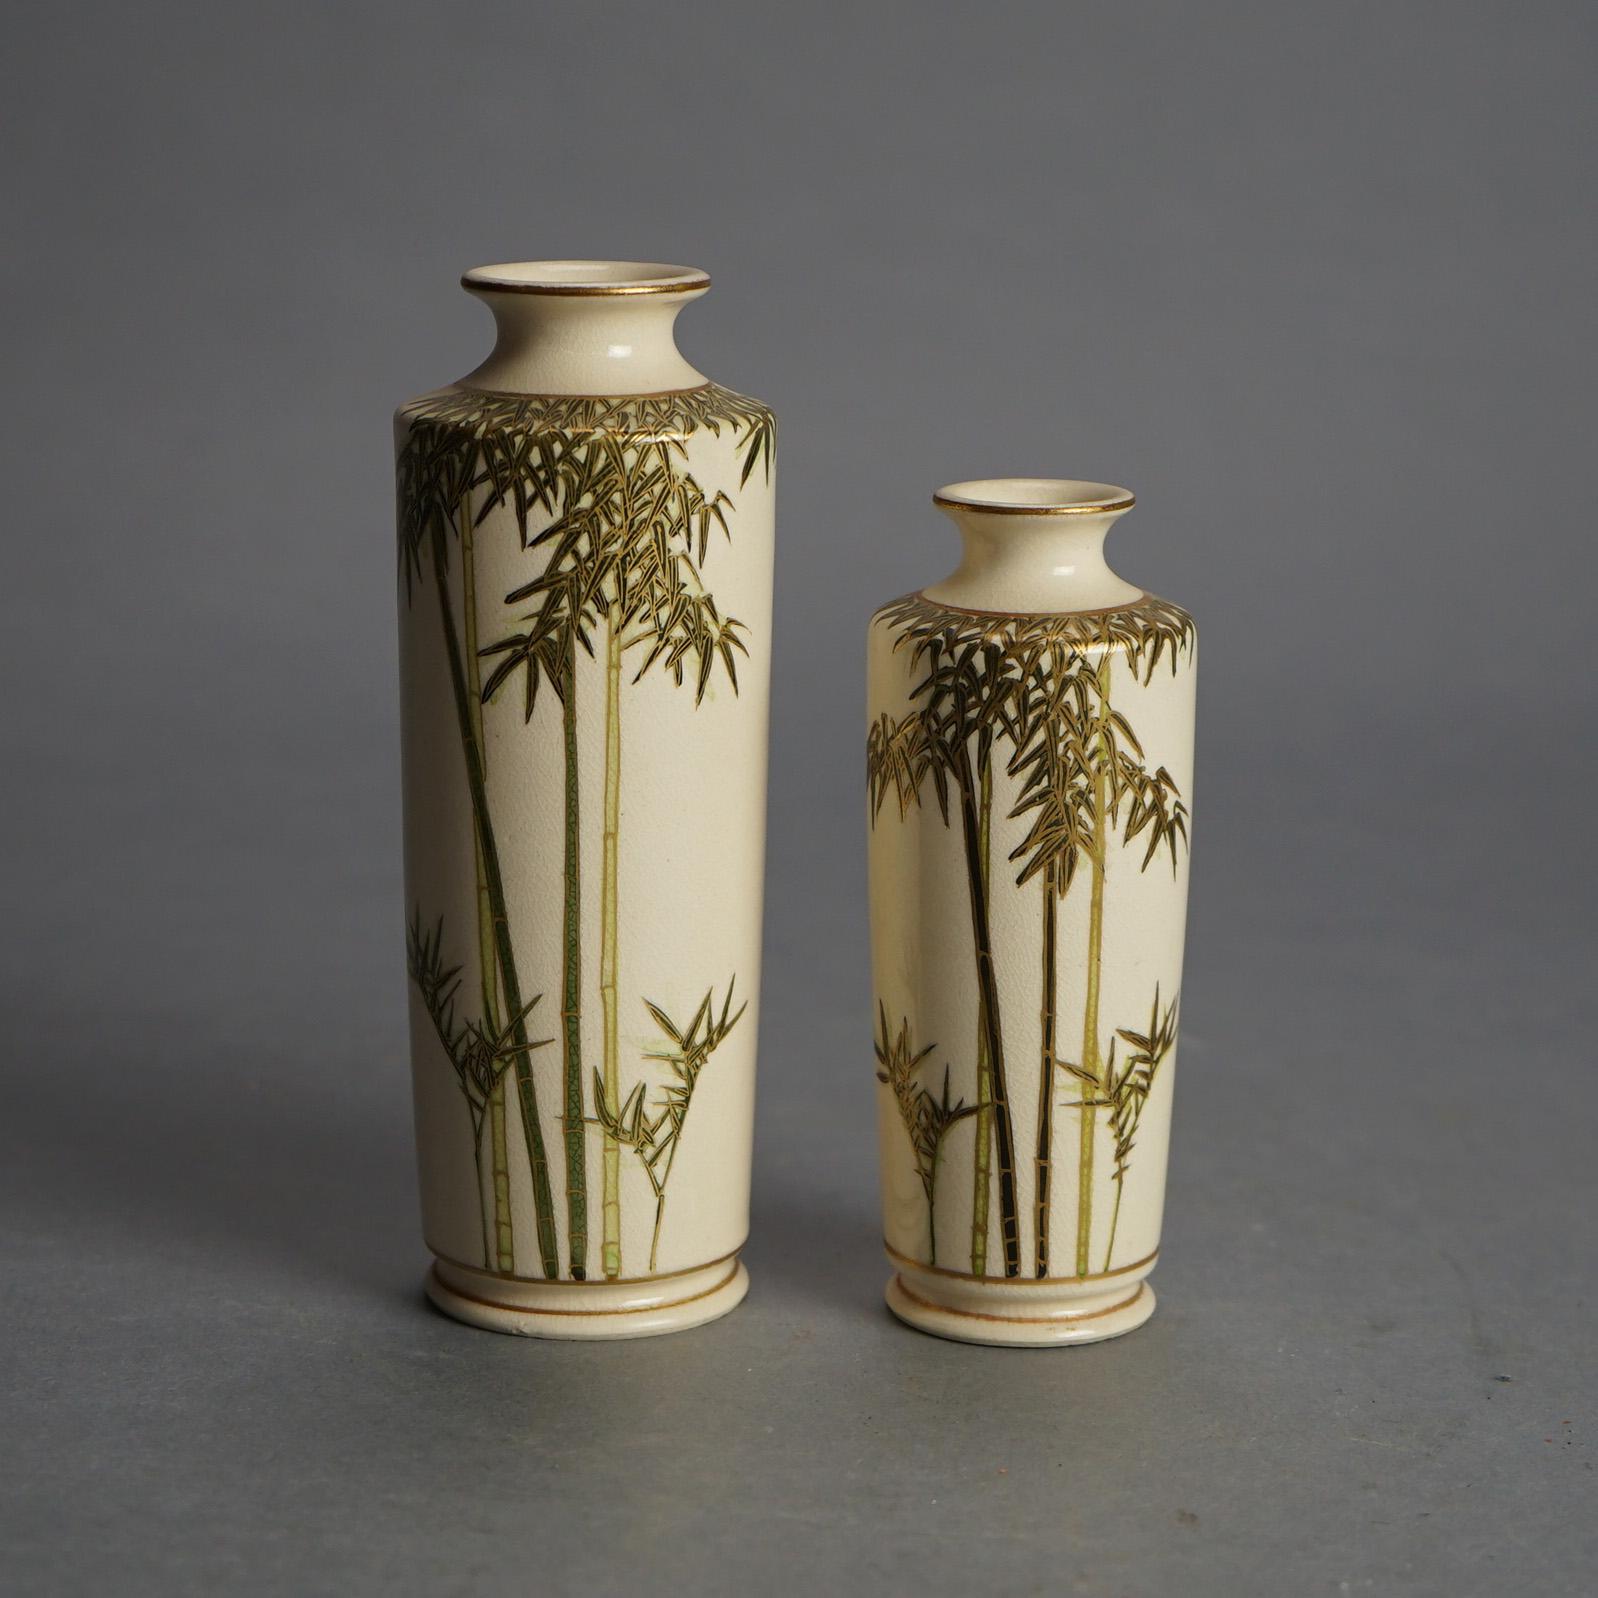 Pair Antique Japanese Satsuma Pottery Vases with Bamboo & Gilt Decoration, Signed, C1920

Measures - 6.5